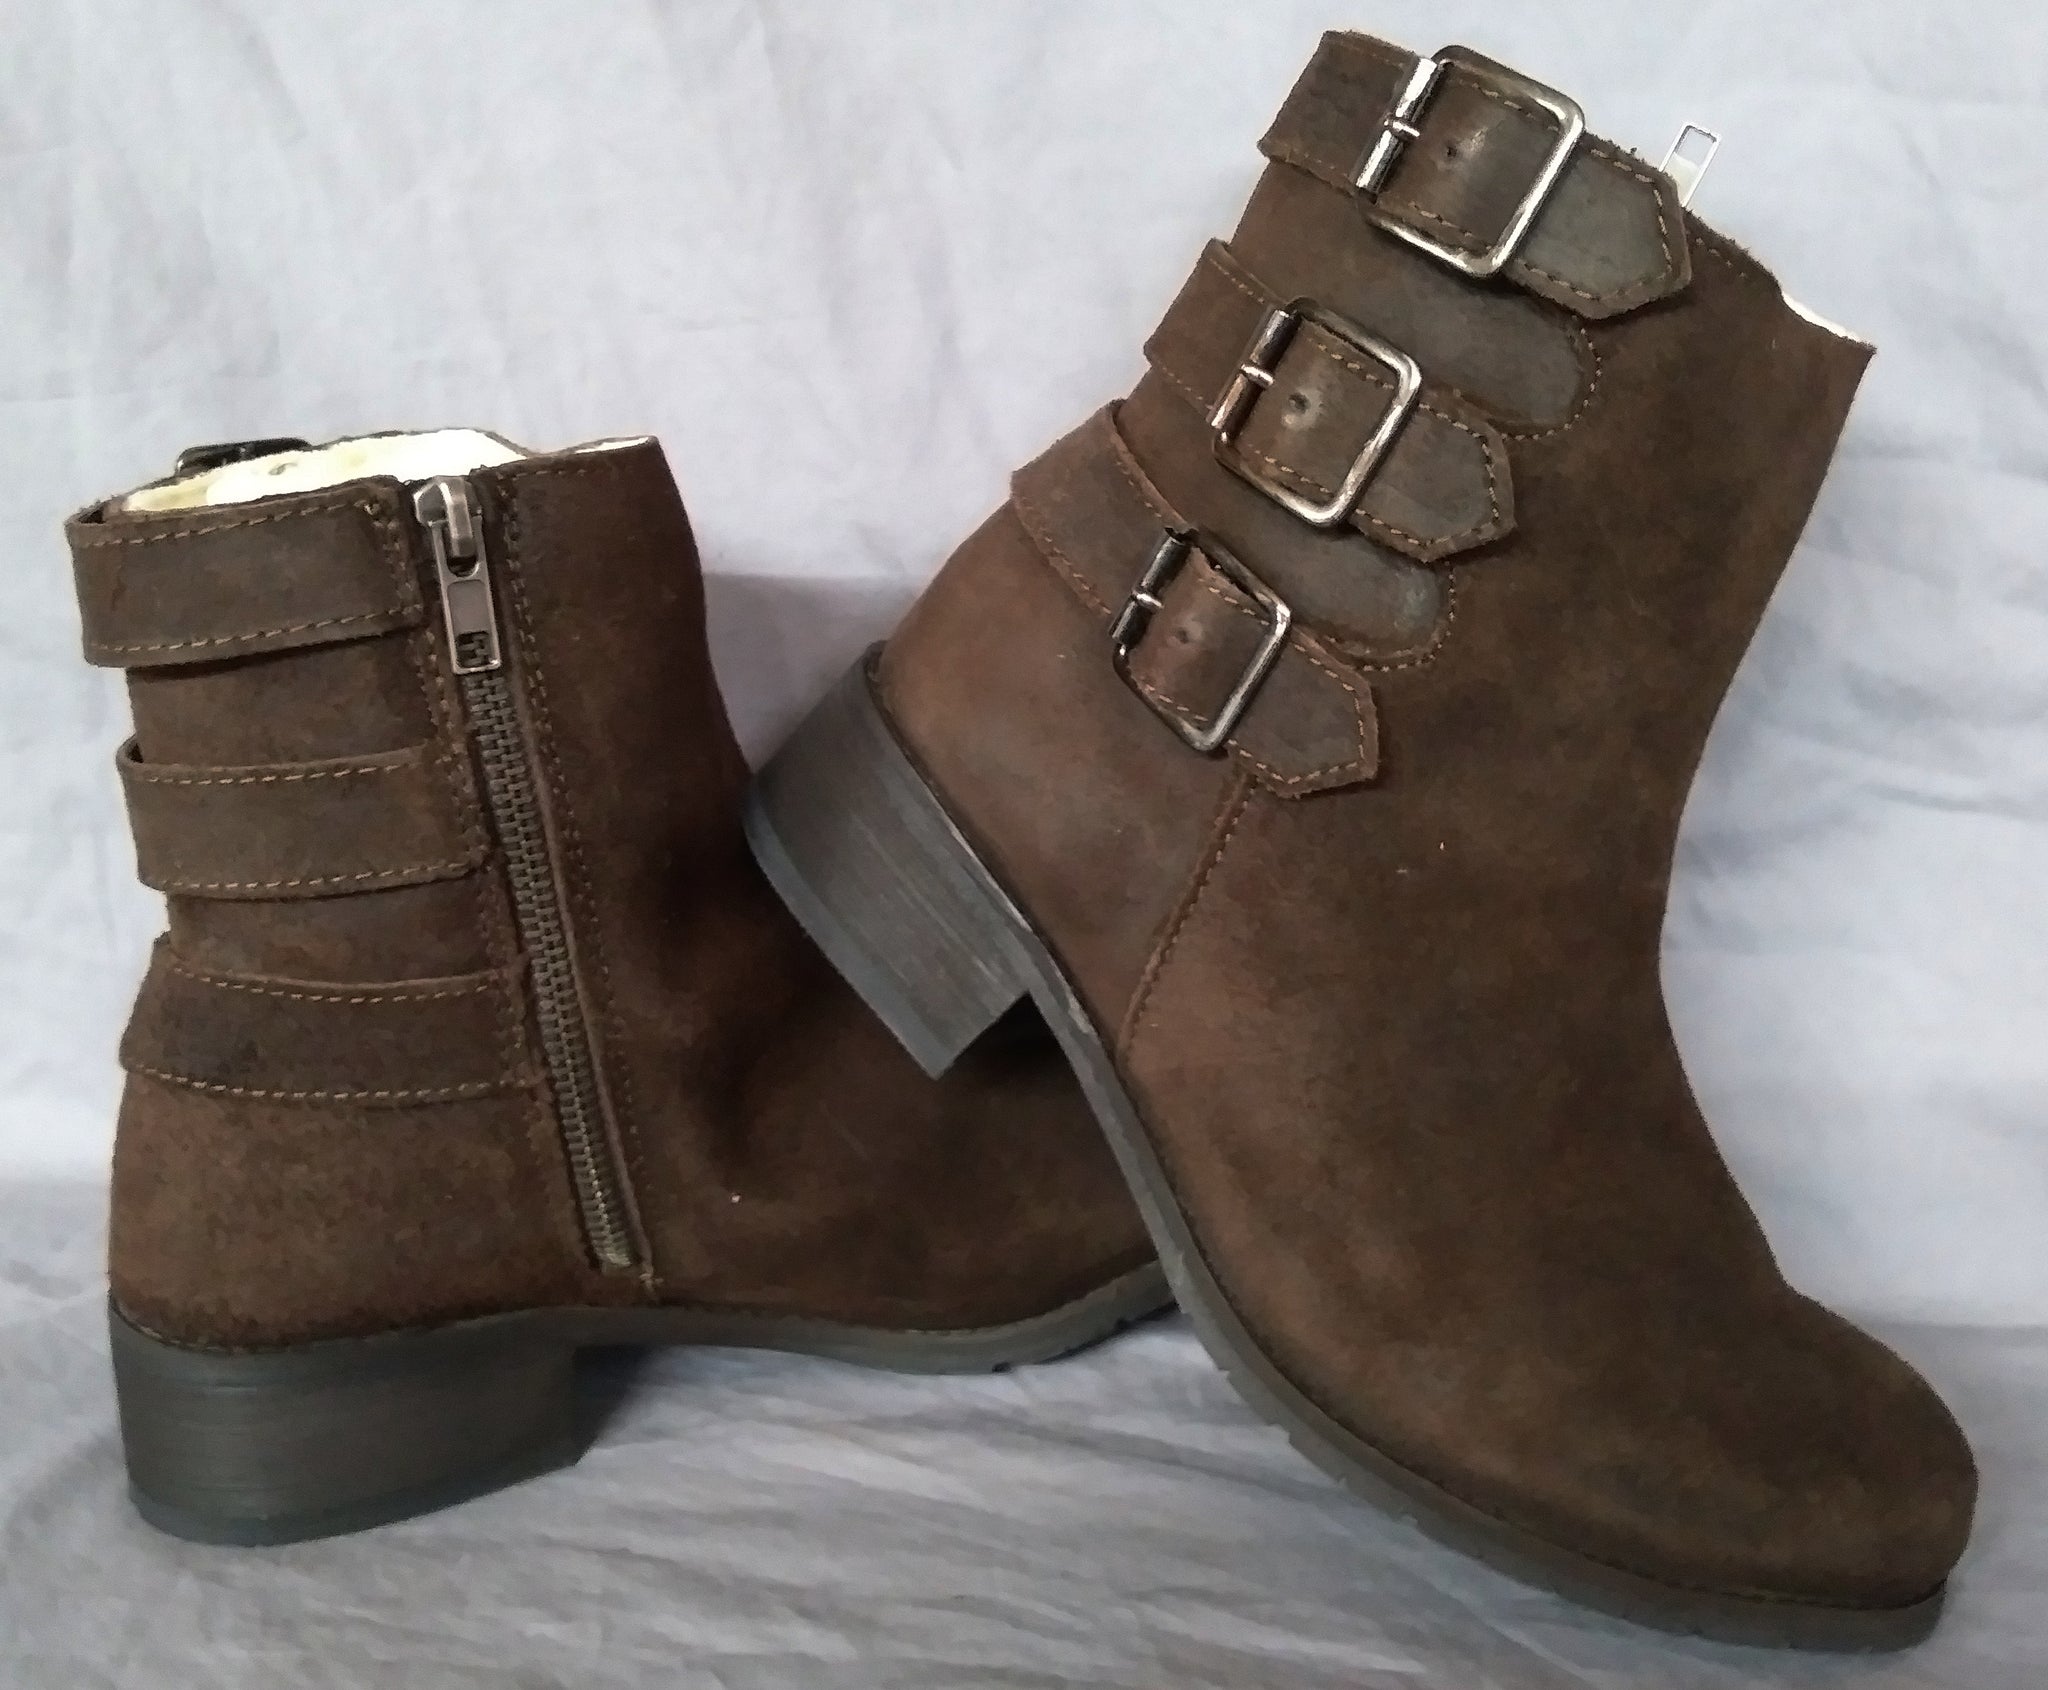 wool lined womens boots cheap online